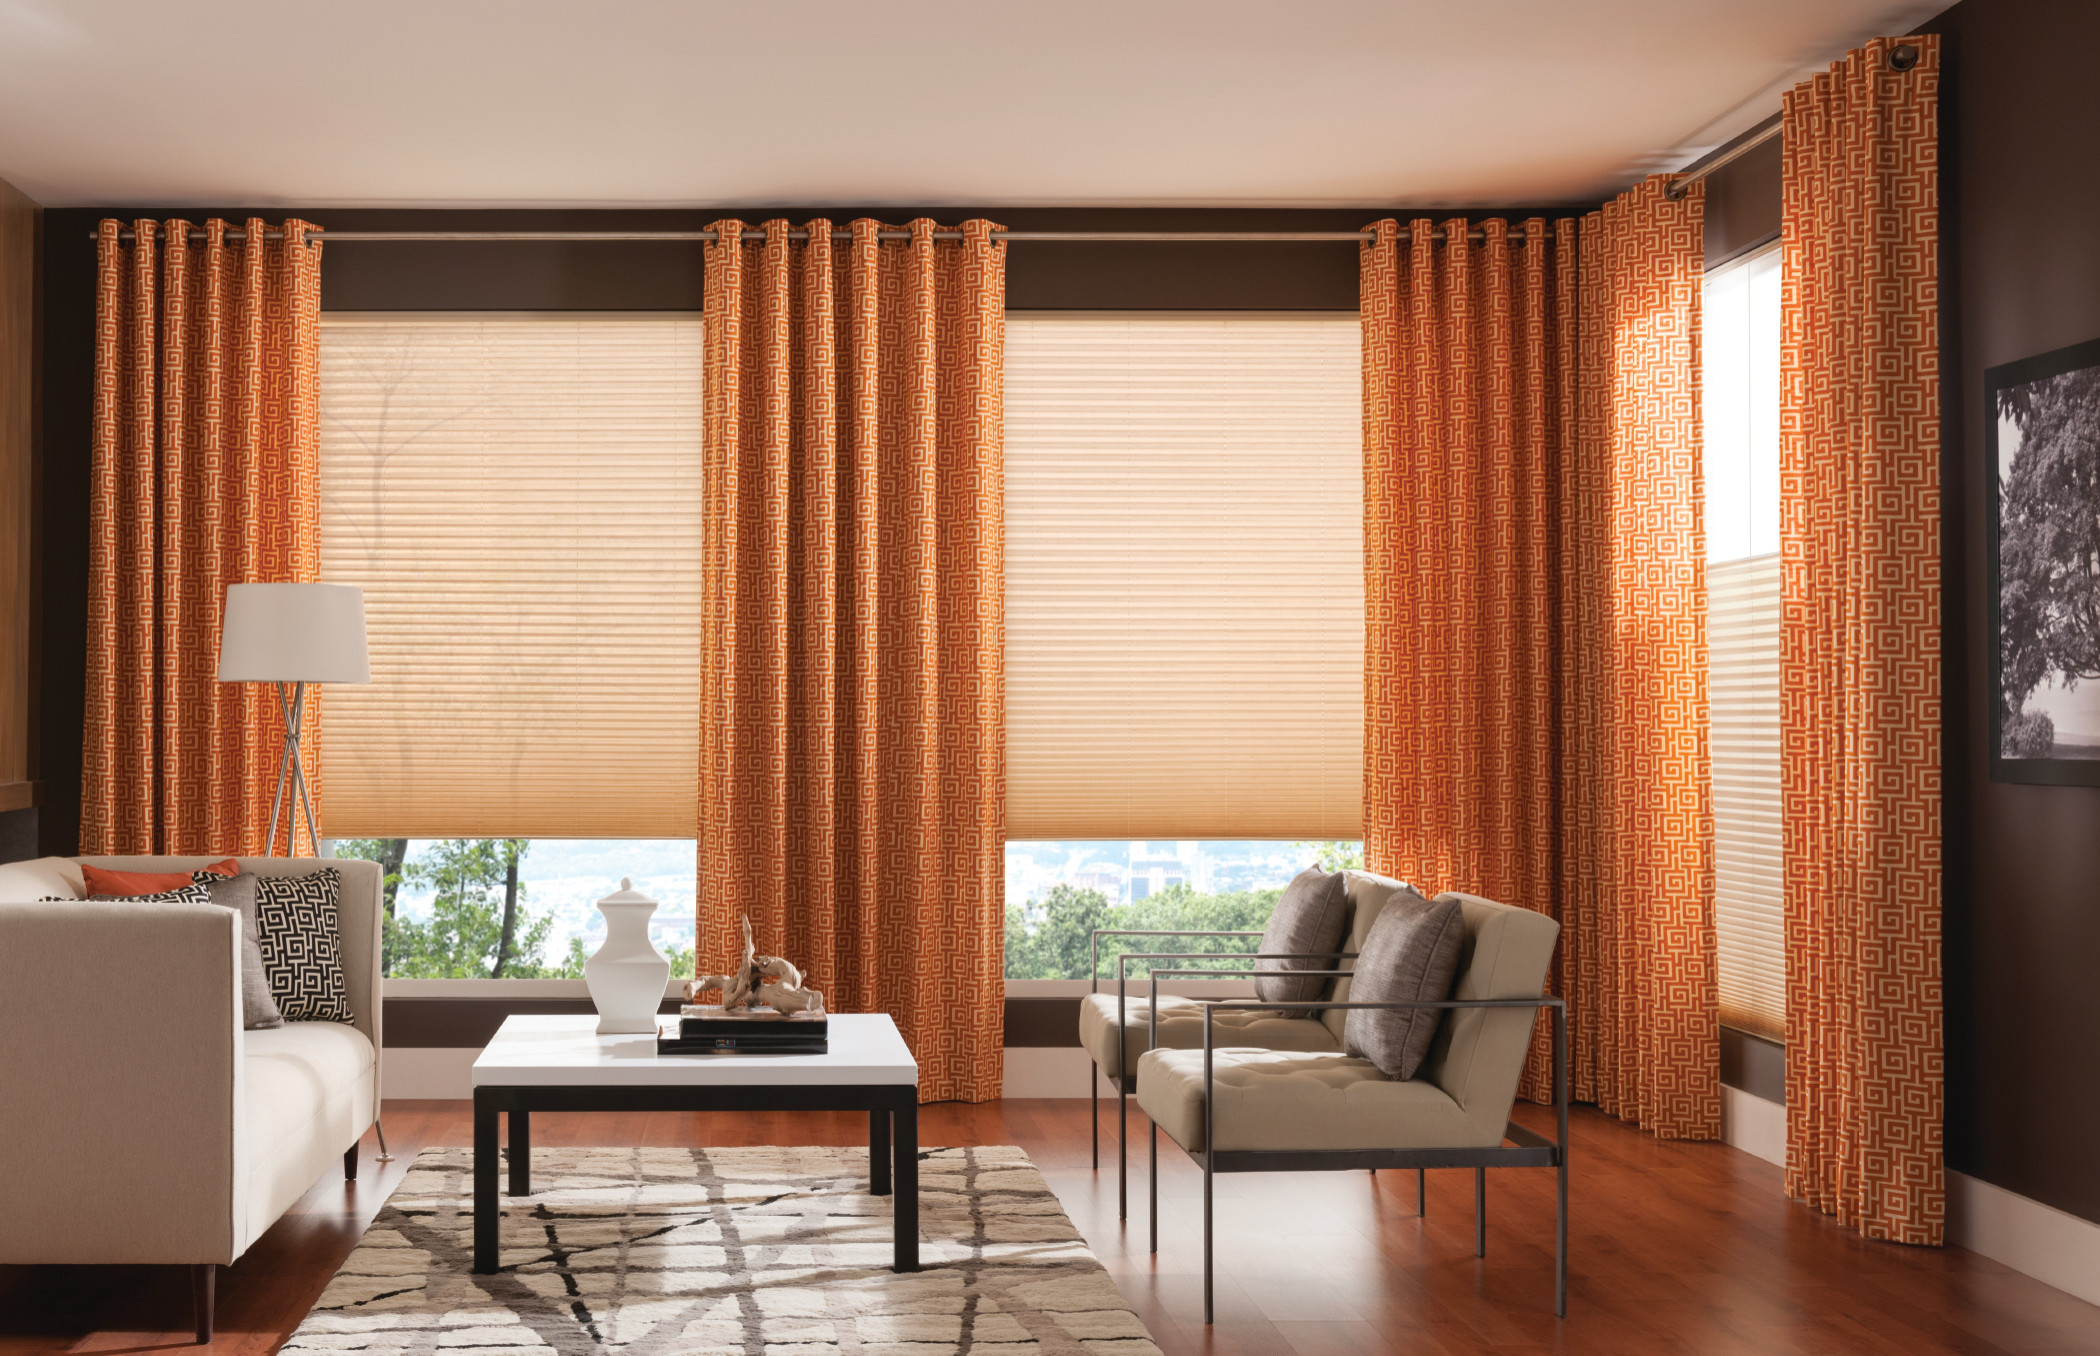 Curtains With Blinds Living Room Ideas, Blinds Ideas For Living Room